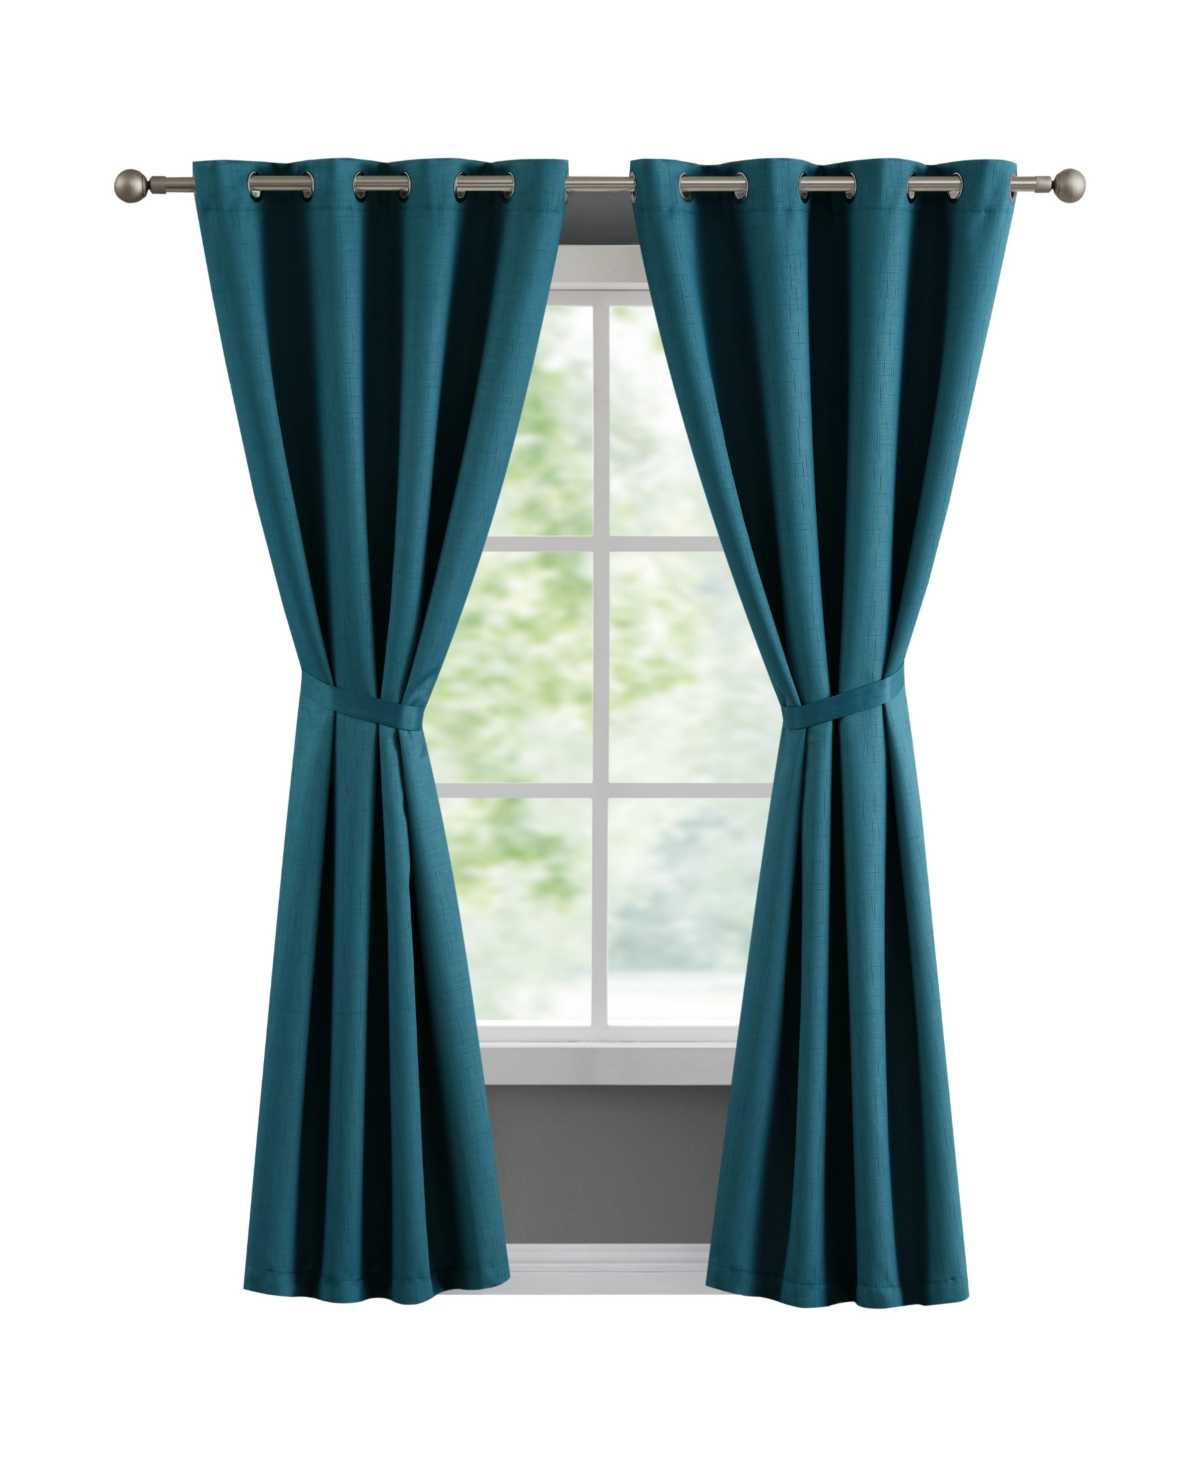 French Connection Ebony Thermal Woven Room Darkening Grommet Window Curtain Panel Pair With Tiebacks, 50" X 96" In Mineral